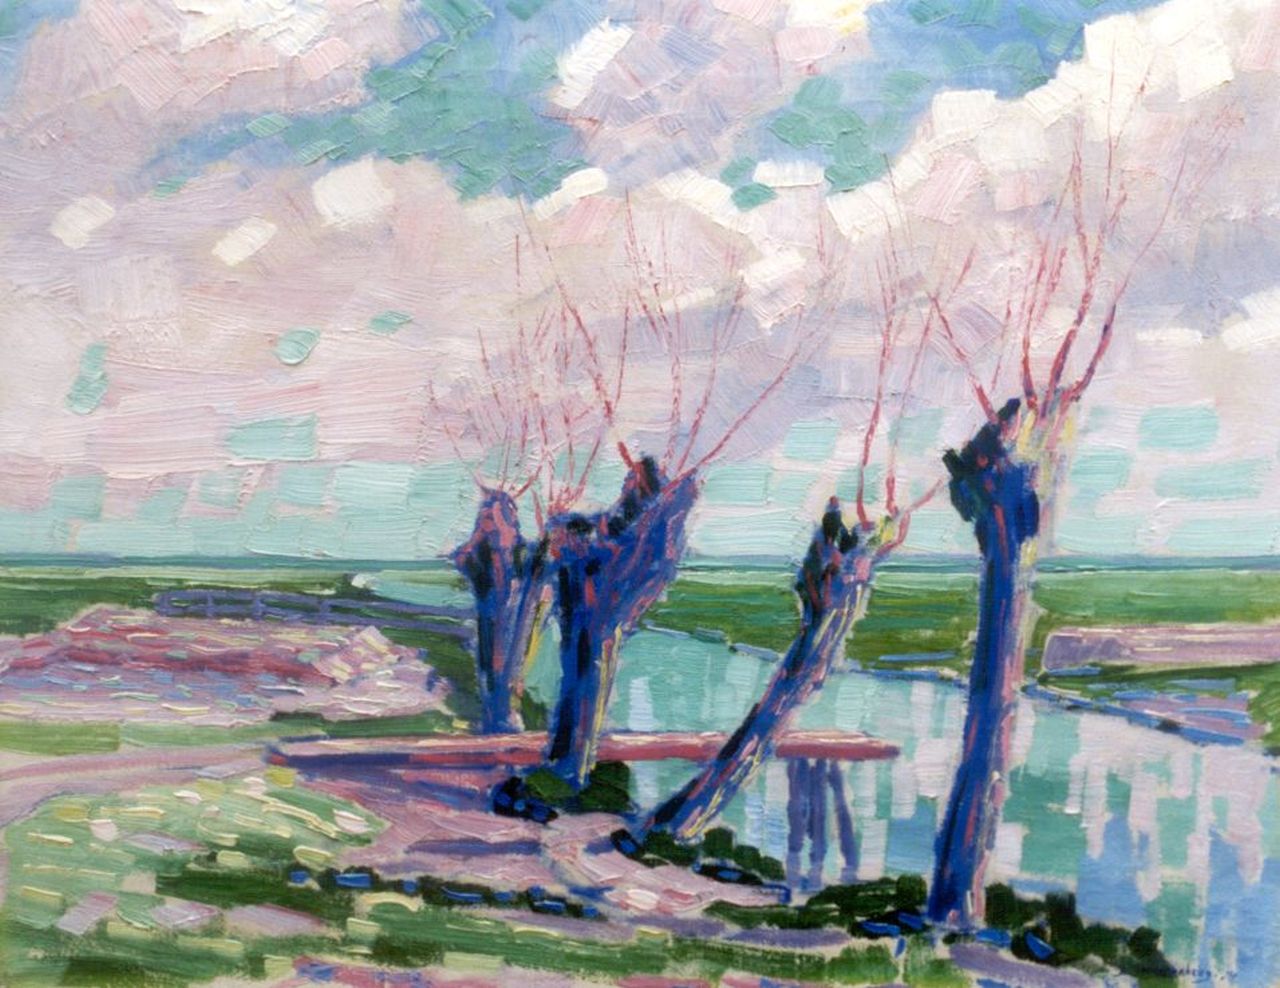 Smorenberg D.  | Dirk Smorenberg, Willows along a stream, oil on canvas 40.5 x 51.0 cm, signed l.r. and dated '14